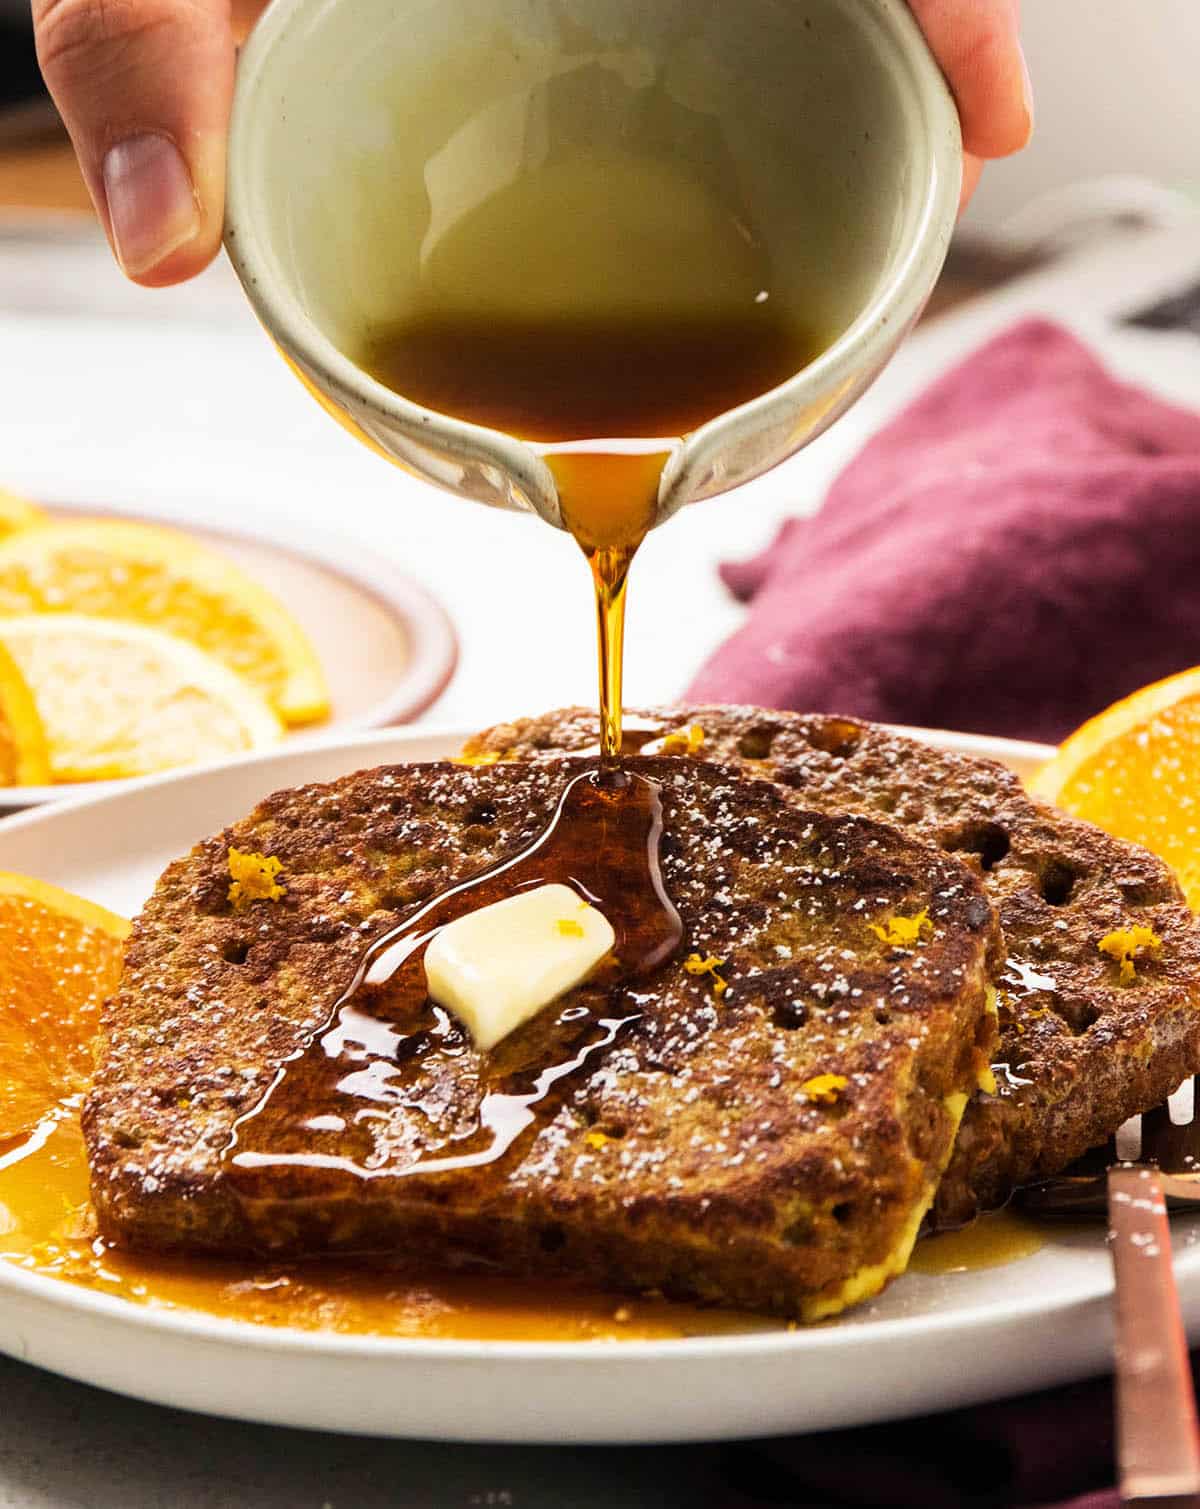 Pouring maple syrup over two slices of french toast.